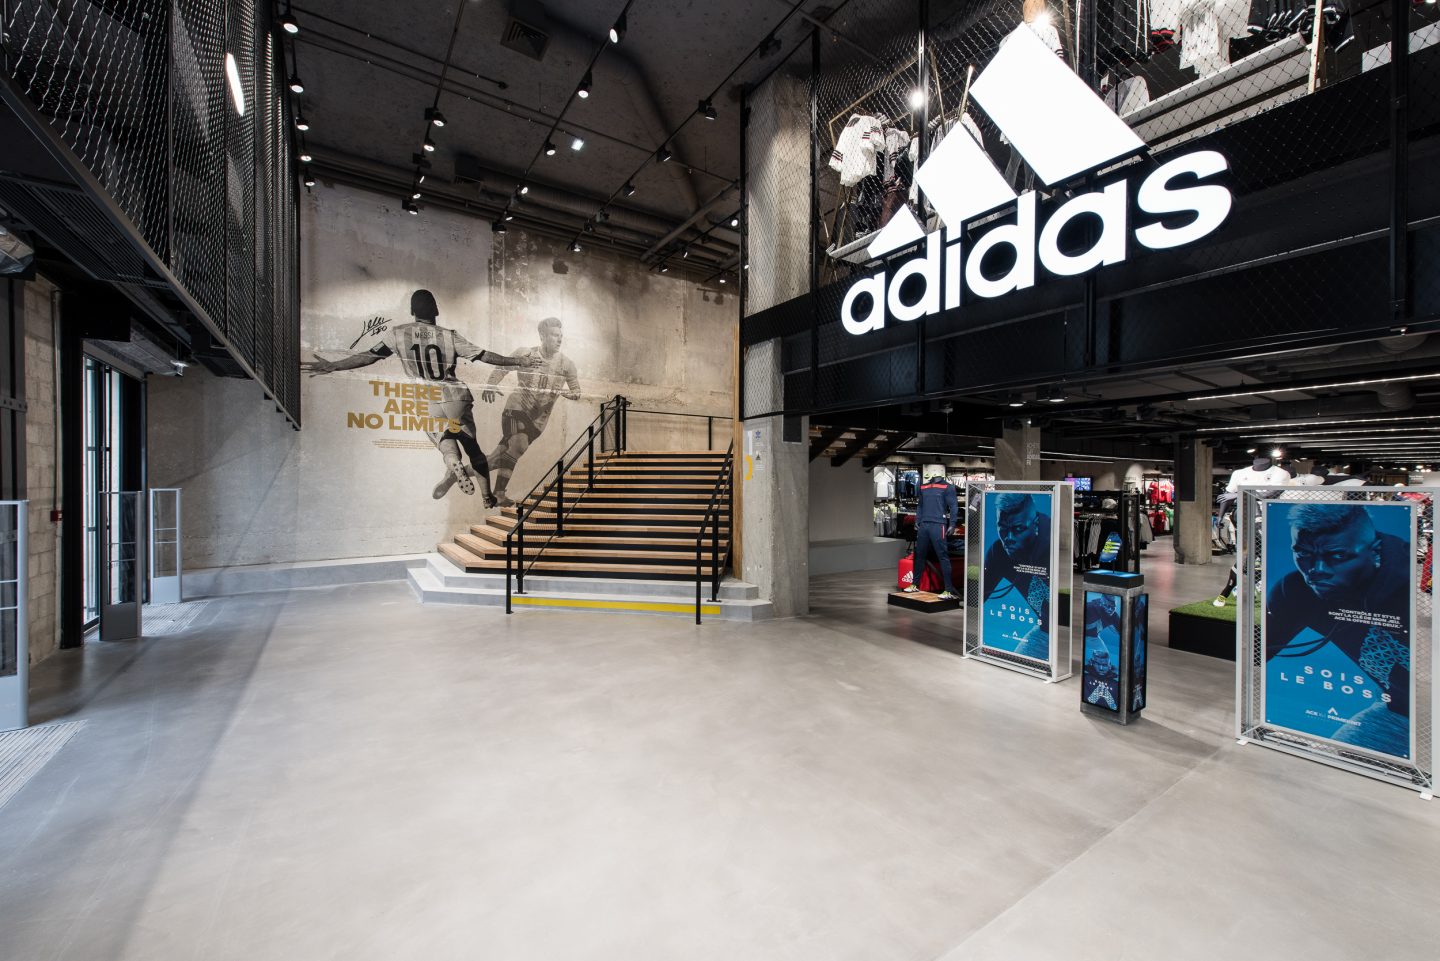 adidas outlet in paris